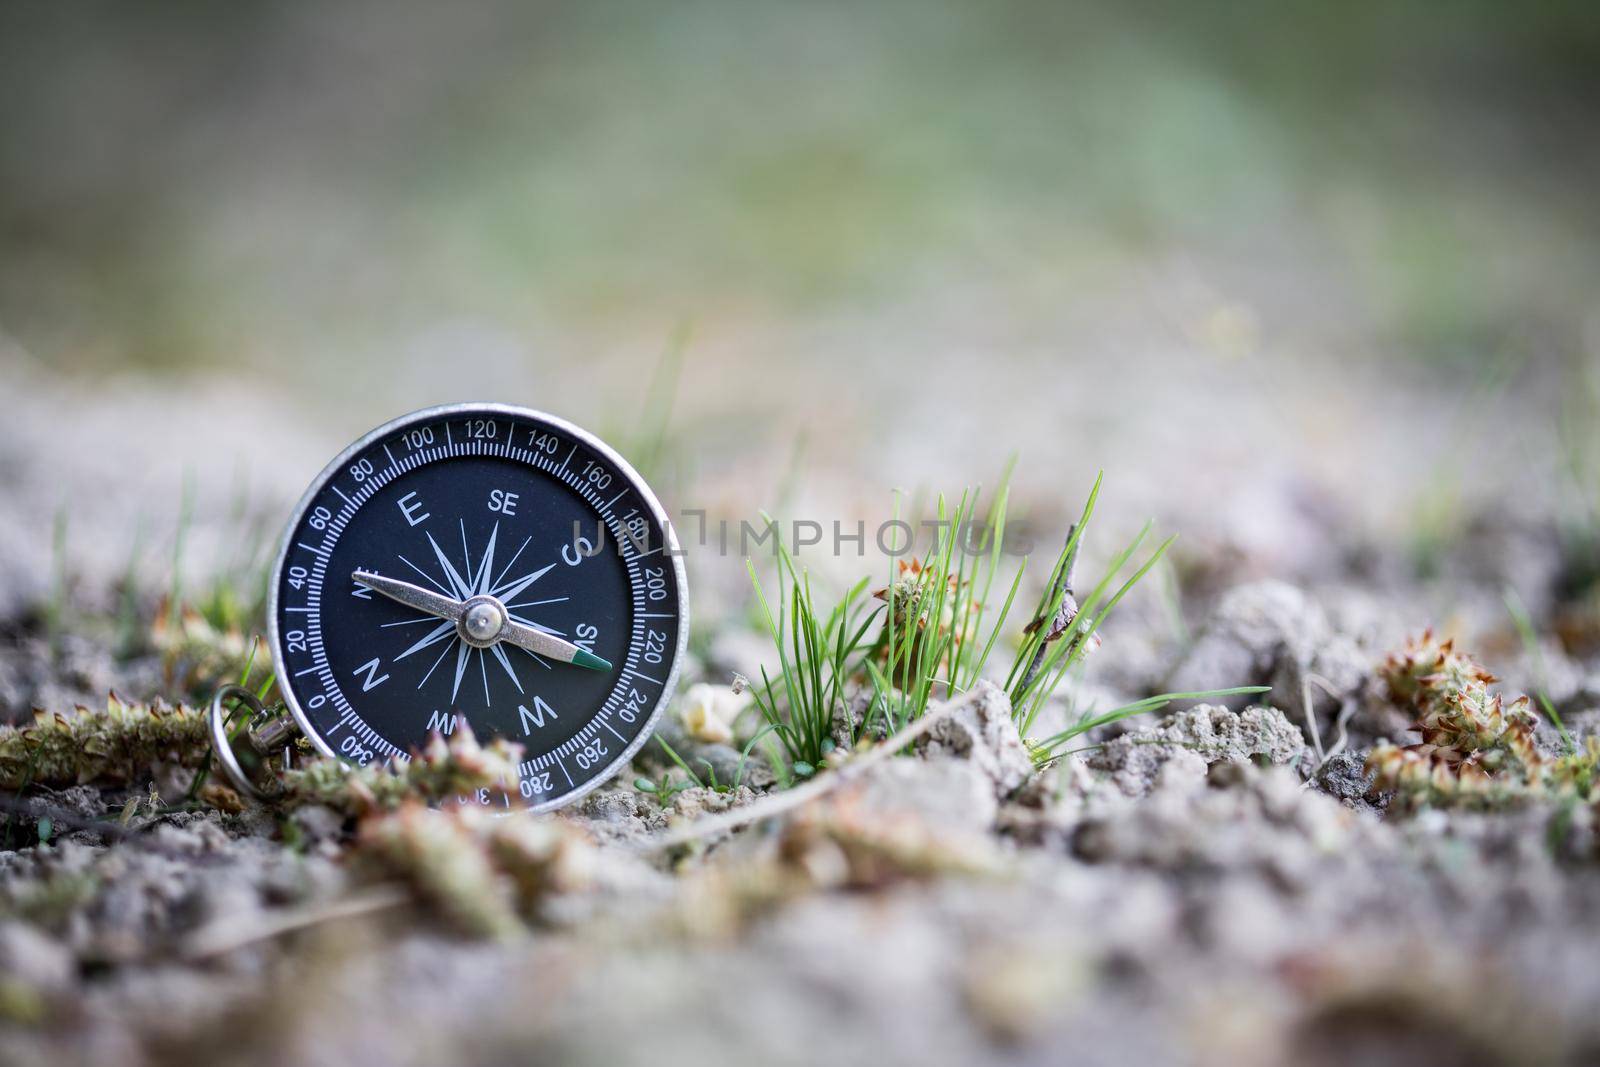 Adventure: Compass is lying on the floor, showing the direction by Daxenbichler